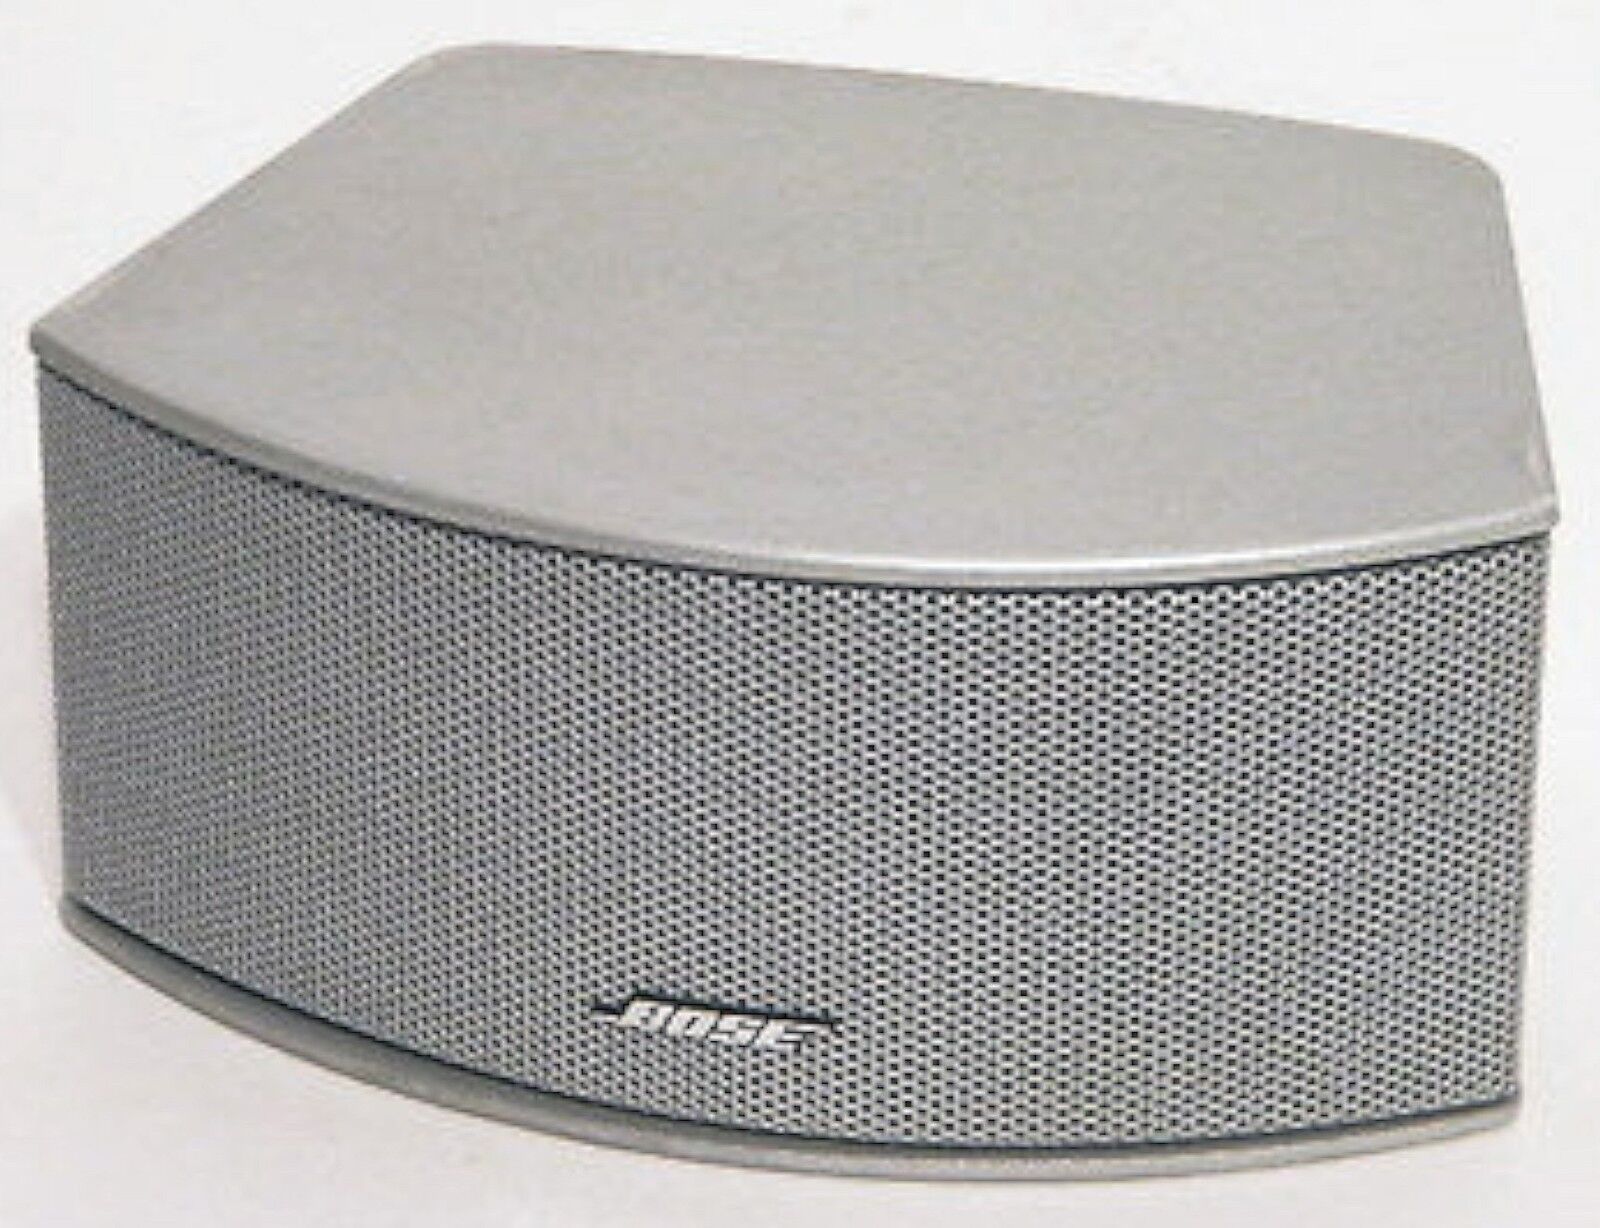 Bose Cinemate GS/3-2-1 Gs Series Ii Gemstone and 50 similar items